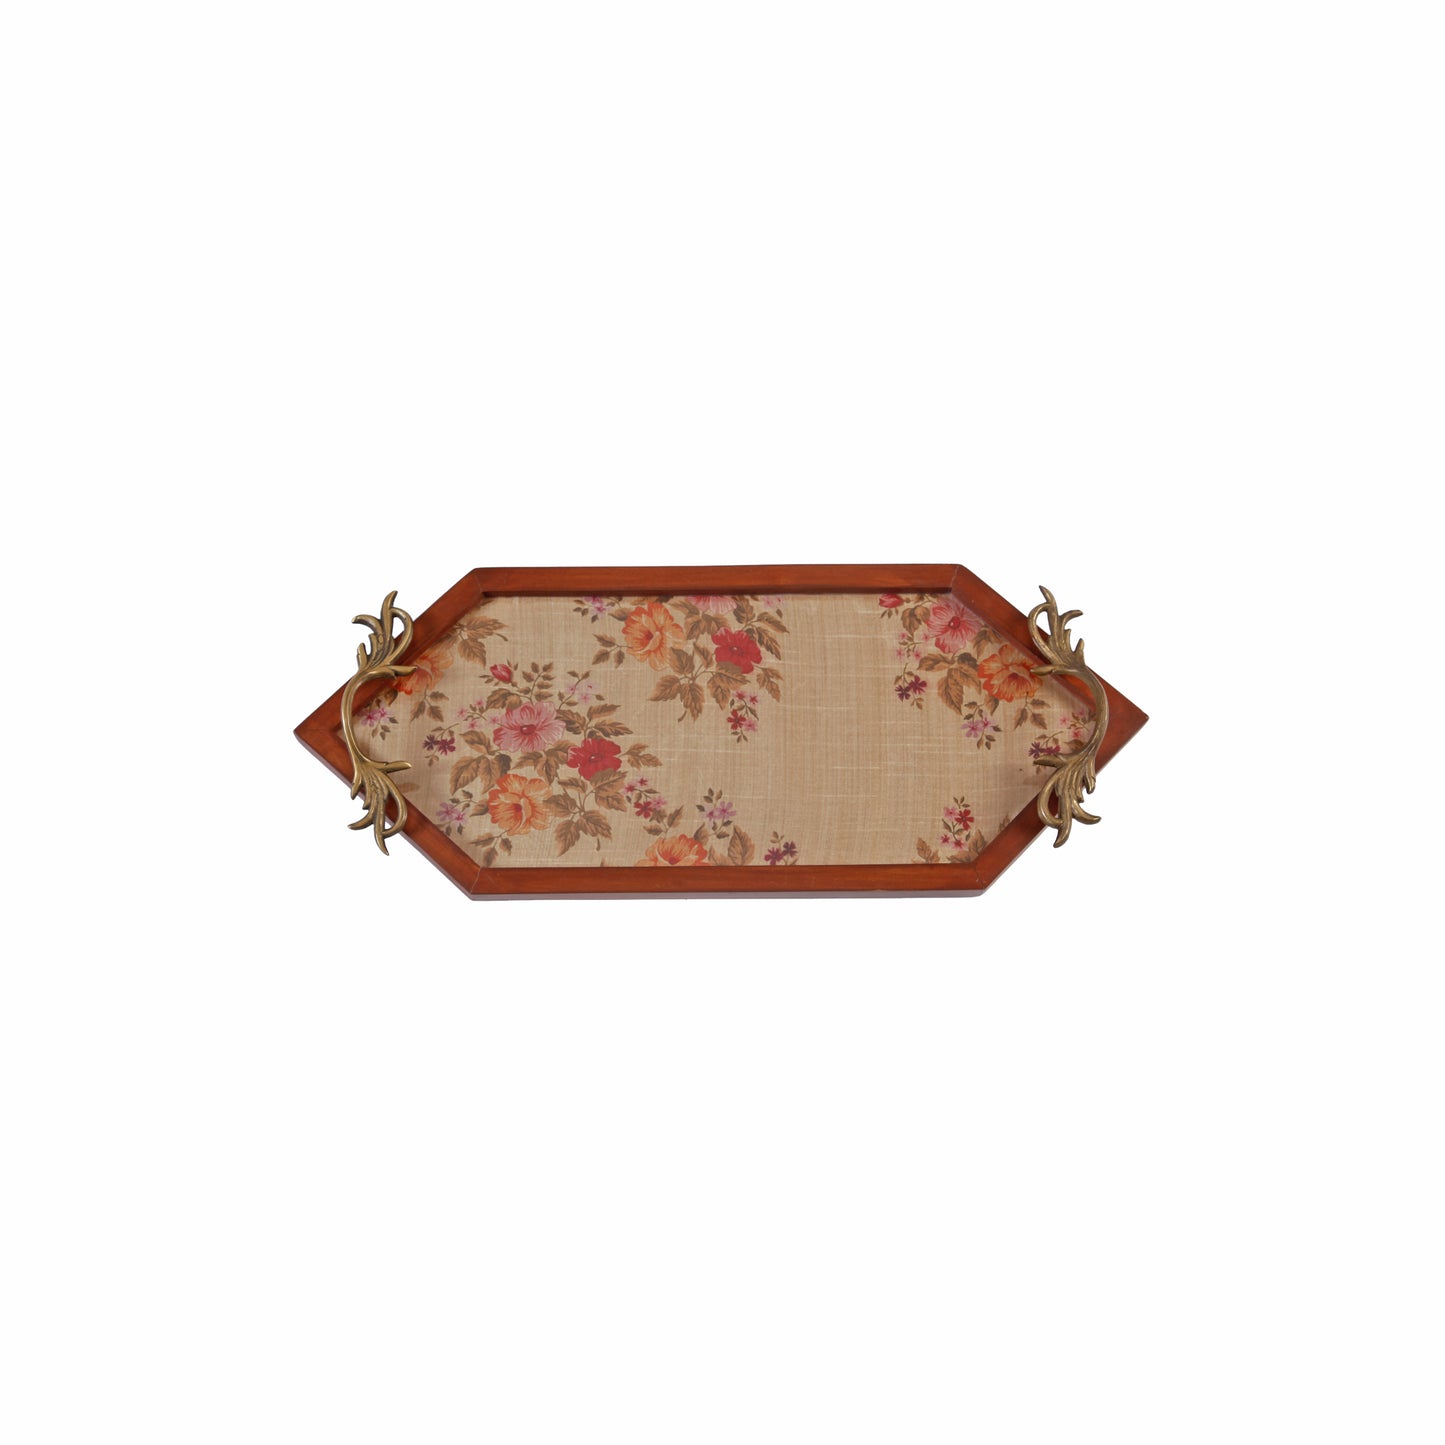 A Tiny Mistake Flowers Pattern Diamond Shaped Teak Serving Tray with Brass Handle, Tray for Serving Tea and Snacks, 49 x 20 x 2 cm